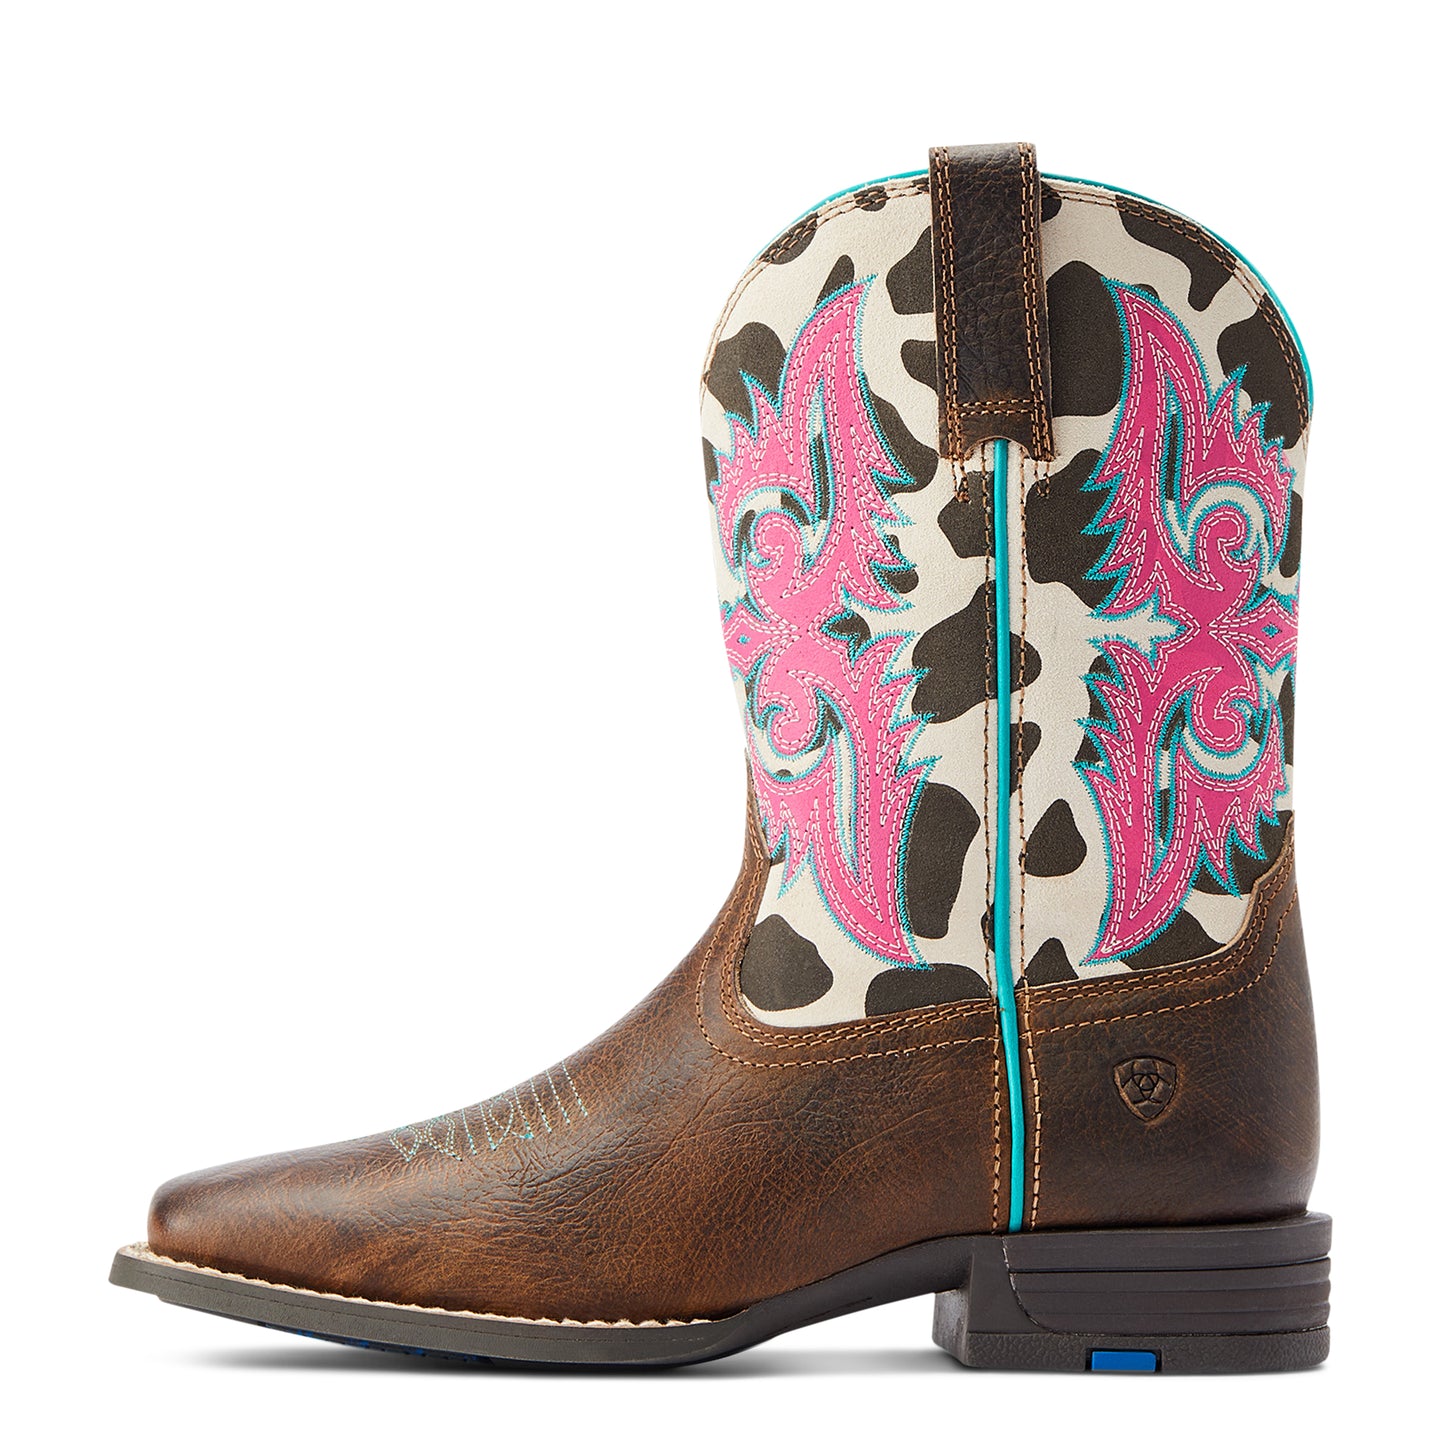 Ariat Youth Girl's Lonestar Rowdy Rust & Cow Print Brown Boots 10044405